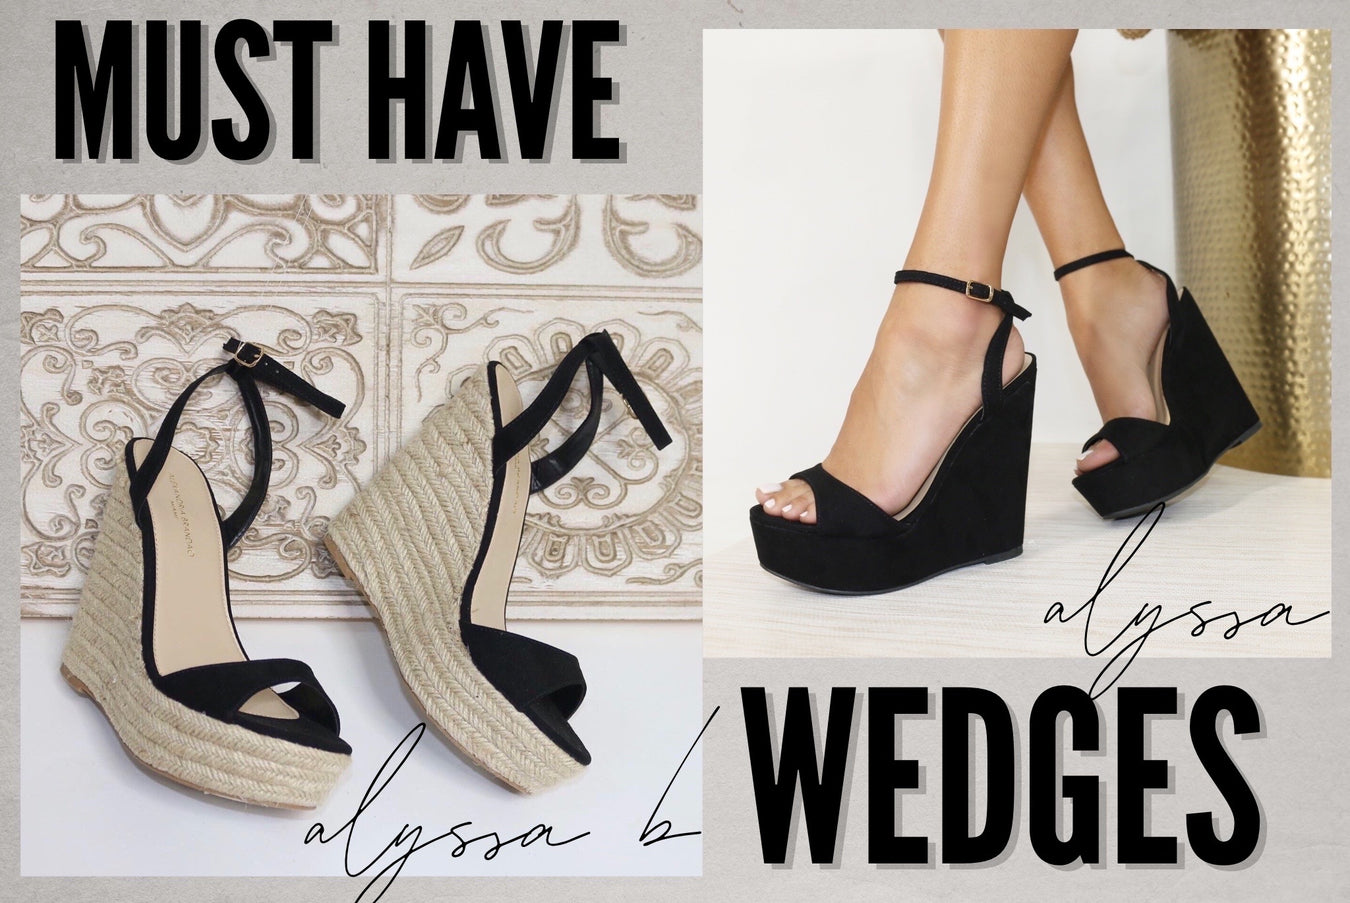 shoes by alexandria brandao classic and basic women's wedges for comfortable fashion. 